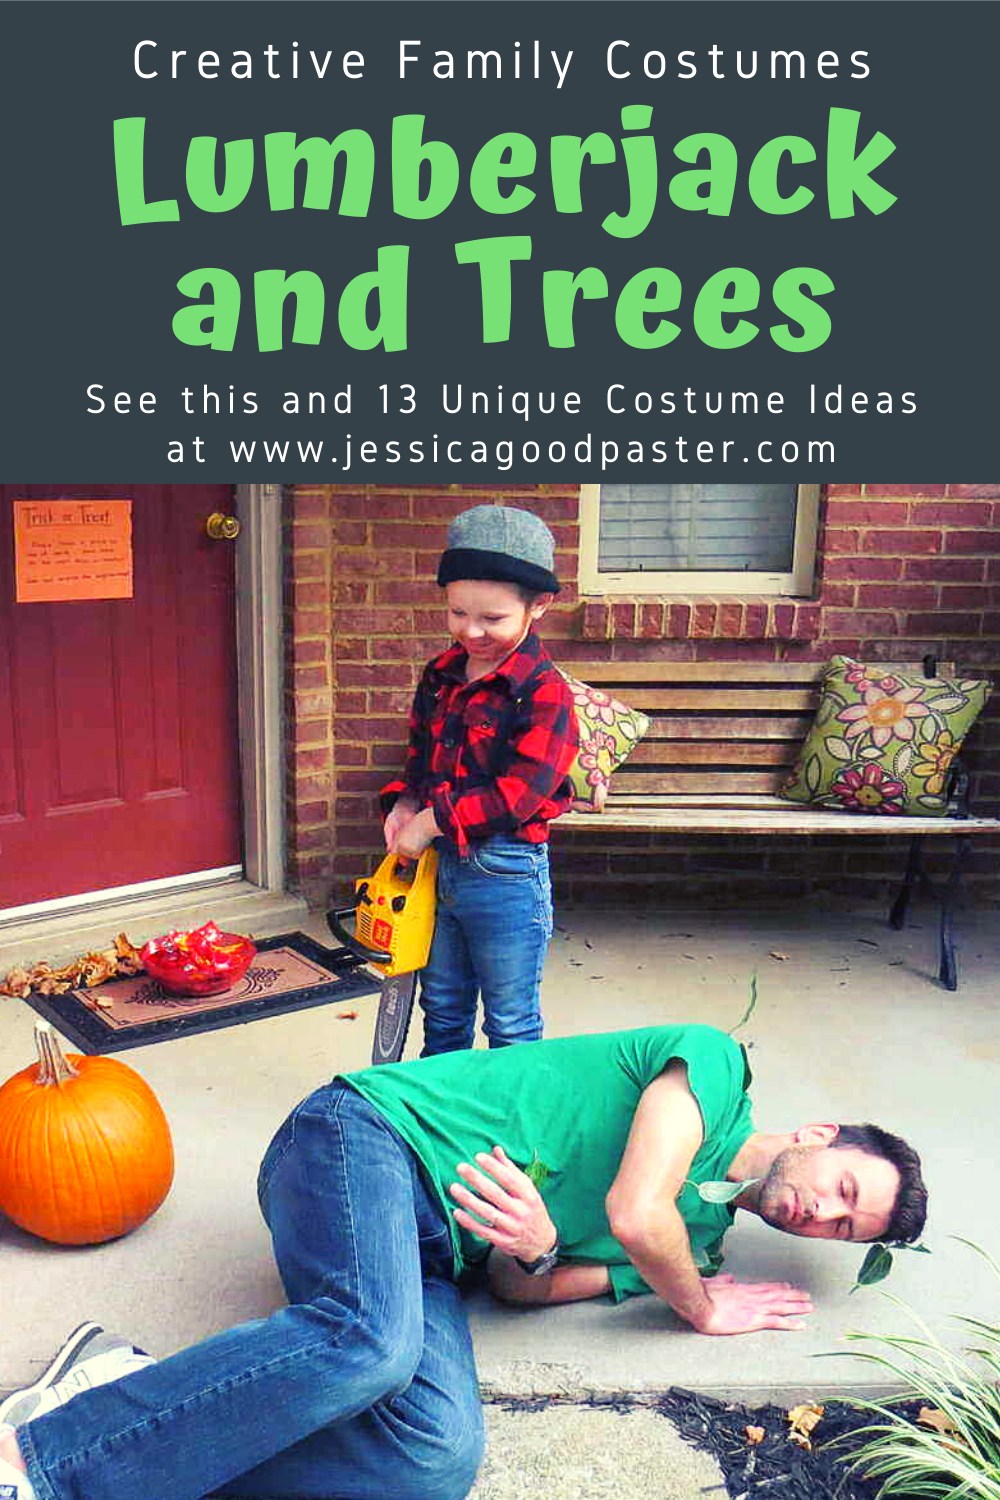 Lumberjack and Trees Family Costume and 13 Unique Halloween Costume Ideas for Your Family or Group! Find the perfect costume for individuals, couples, families, groups, and kids. Includes some of the best DIY costume ideas as well. #halloween #costumes #halloweencostumes #couplecostumes #groupcostume #diycostumes #familycostume #trunkortreat